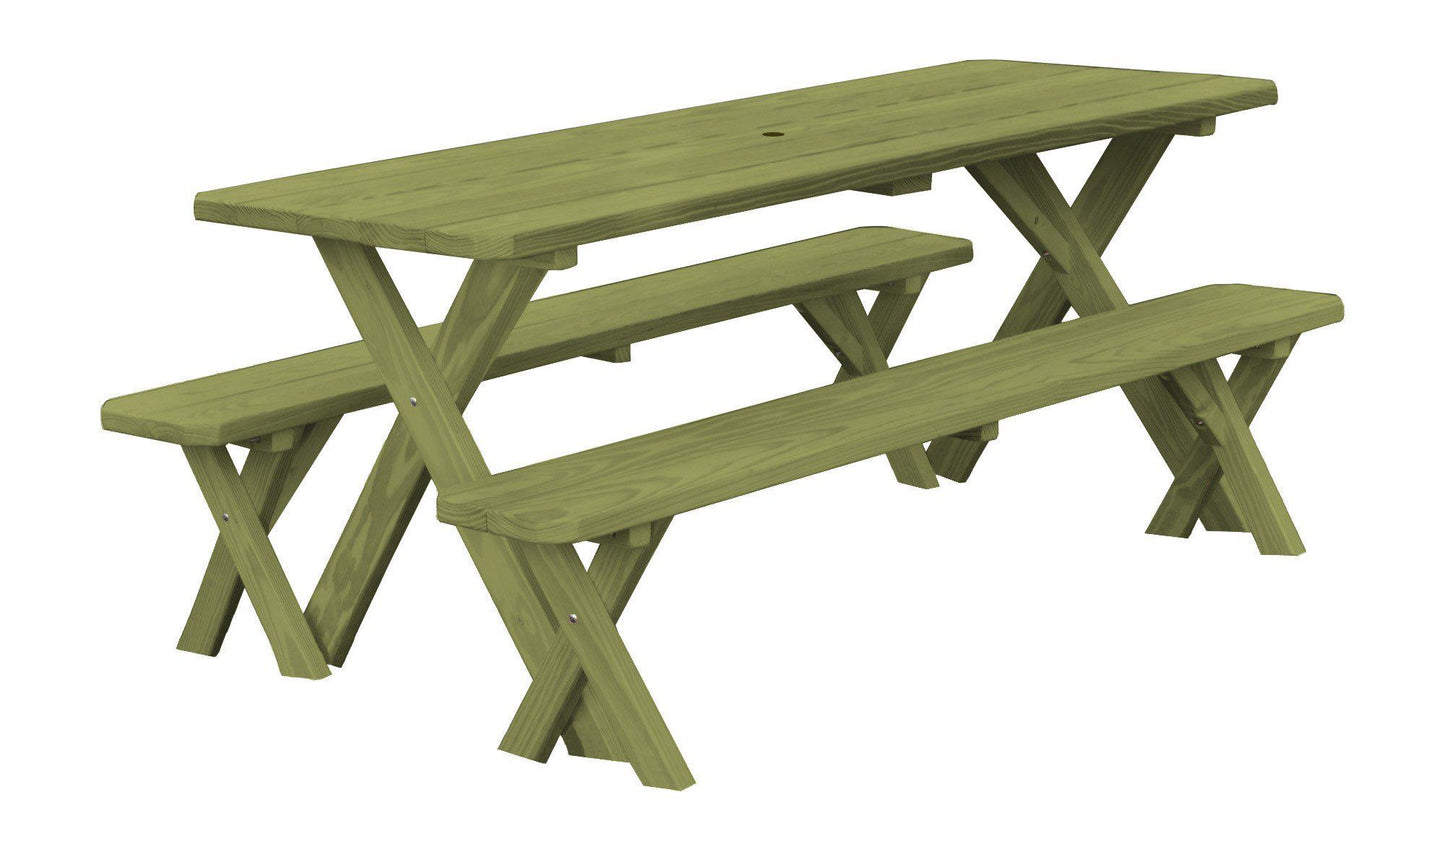 A&L Furniture Co. Yellow Pine 6' Cross-leg Table w/2 Benches - Umbrella Hole - LEAD TIME TO SHIP 10 BUSINESS DAYS